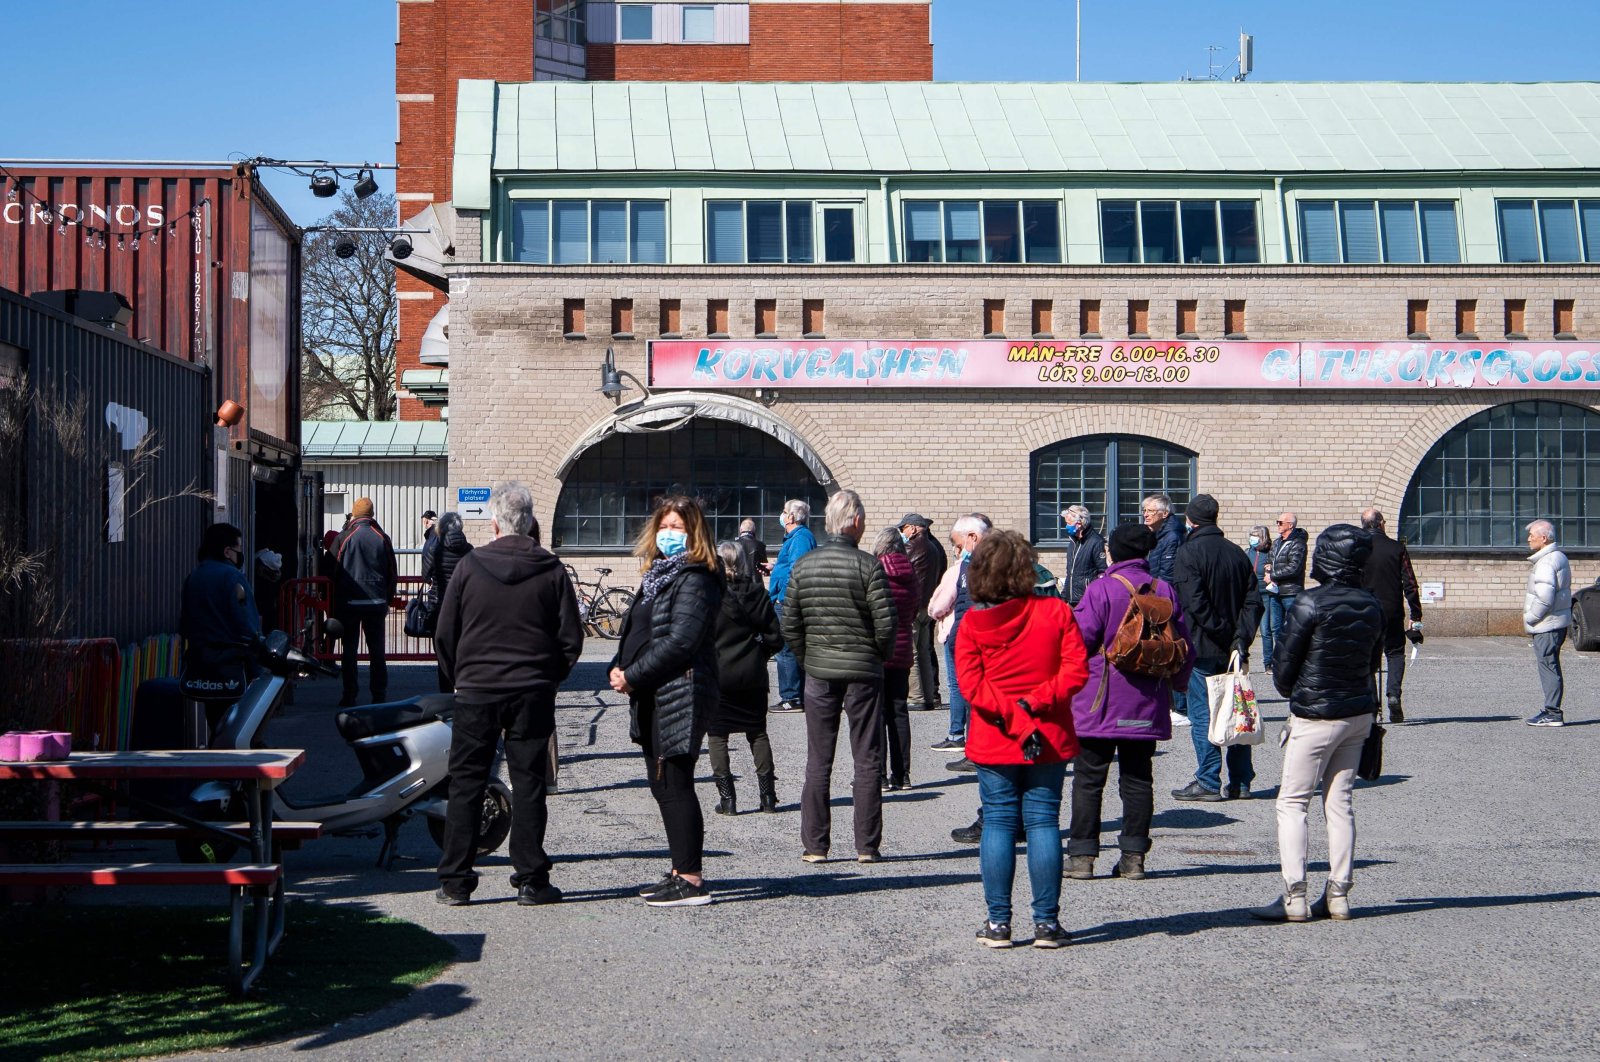 People wait in line to get their vaccines against Covid-19 outside a nightclub turned mass vaccination center in Stockholm, Sweden, on April 16, 2021, amid the  COVID-19 pandemic. (AFP) 